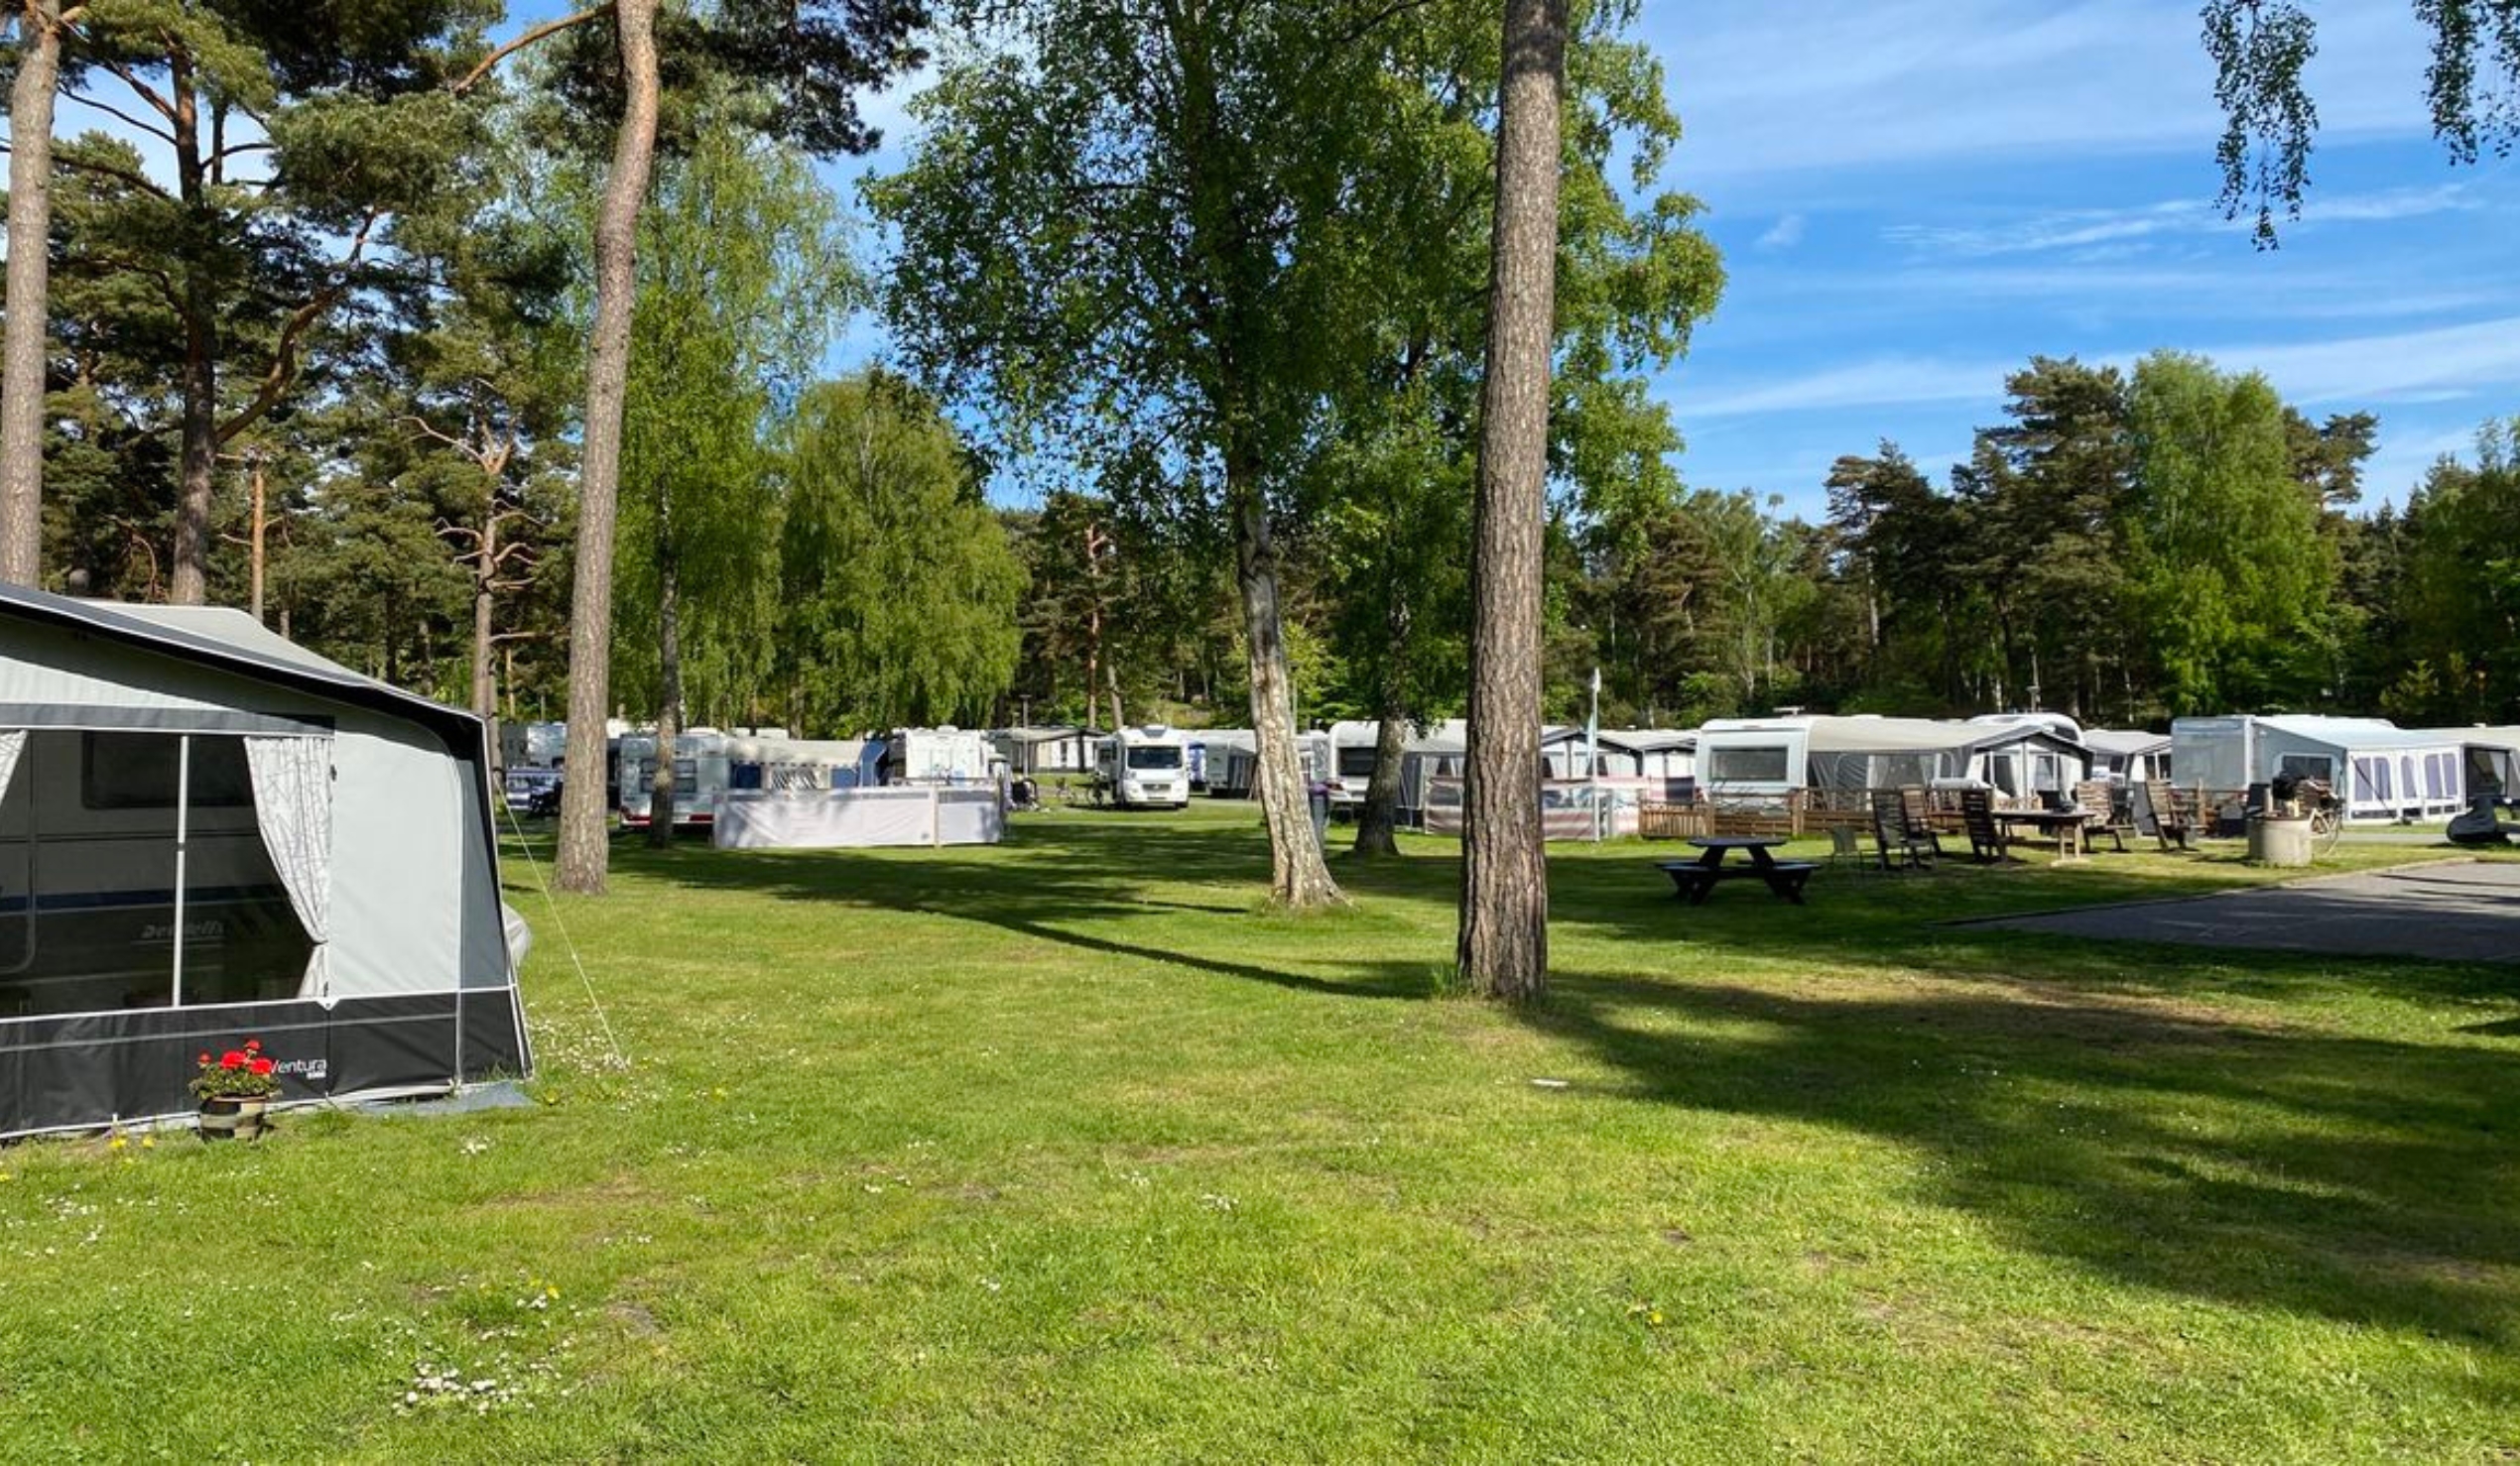 Ystad Camping is a large and green campsite.